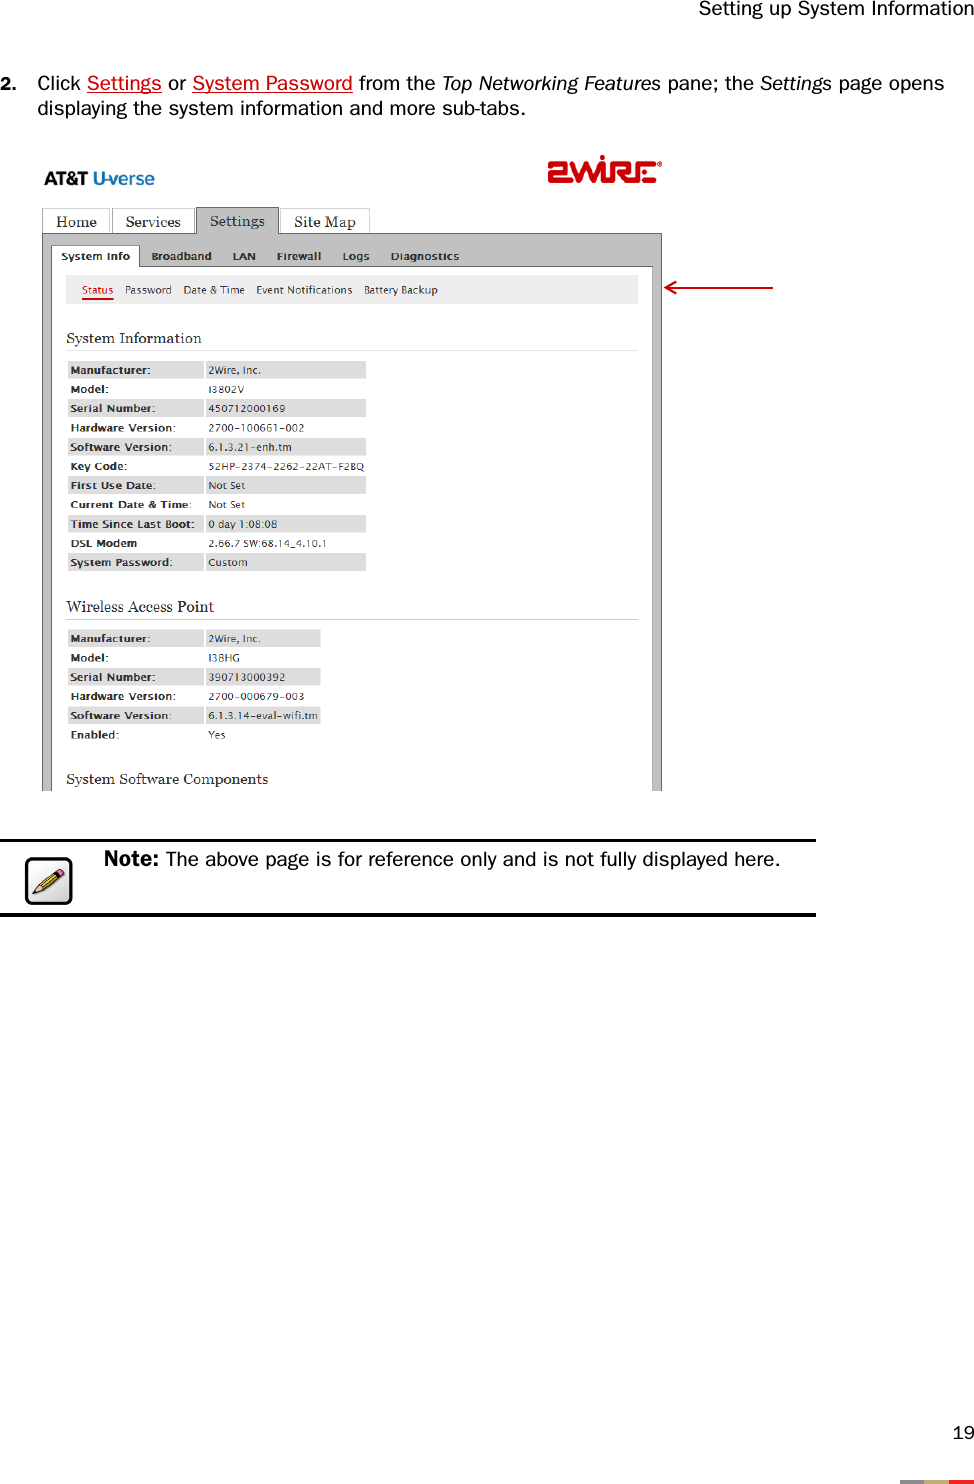 Setting up System Information192. Click Settings or System Password from the Top Networking Features pane; the Settings page opens displaying the system information and more sub-tabs. Note: The above page is for reference only and is not fully displayed here.